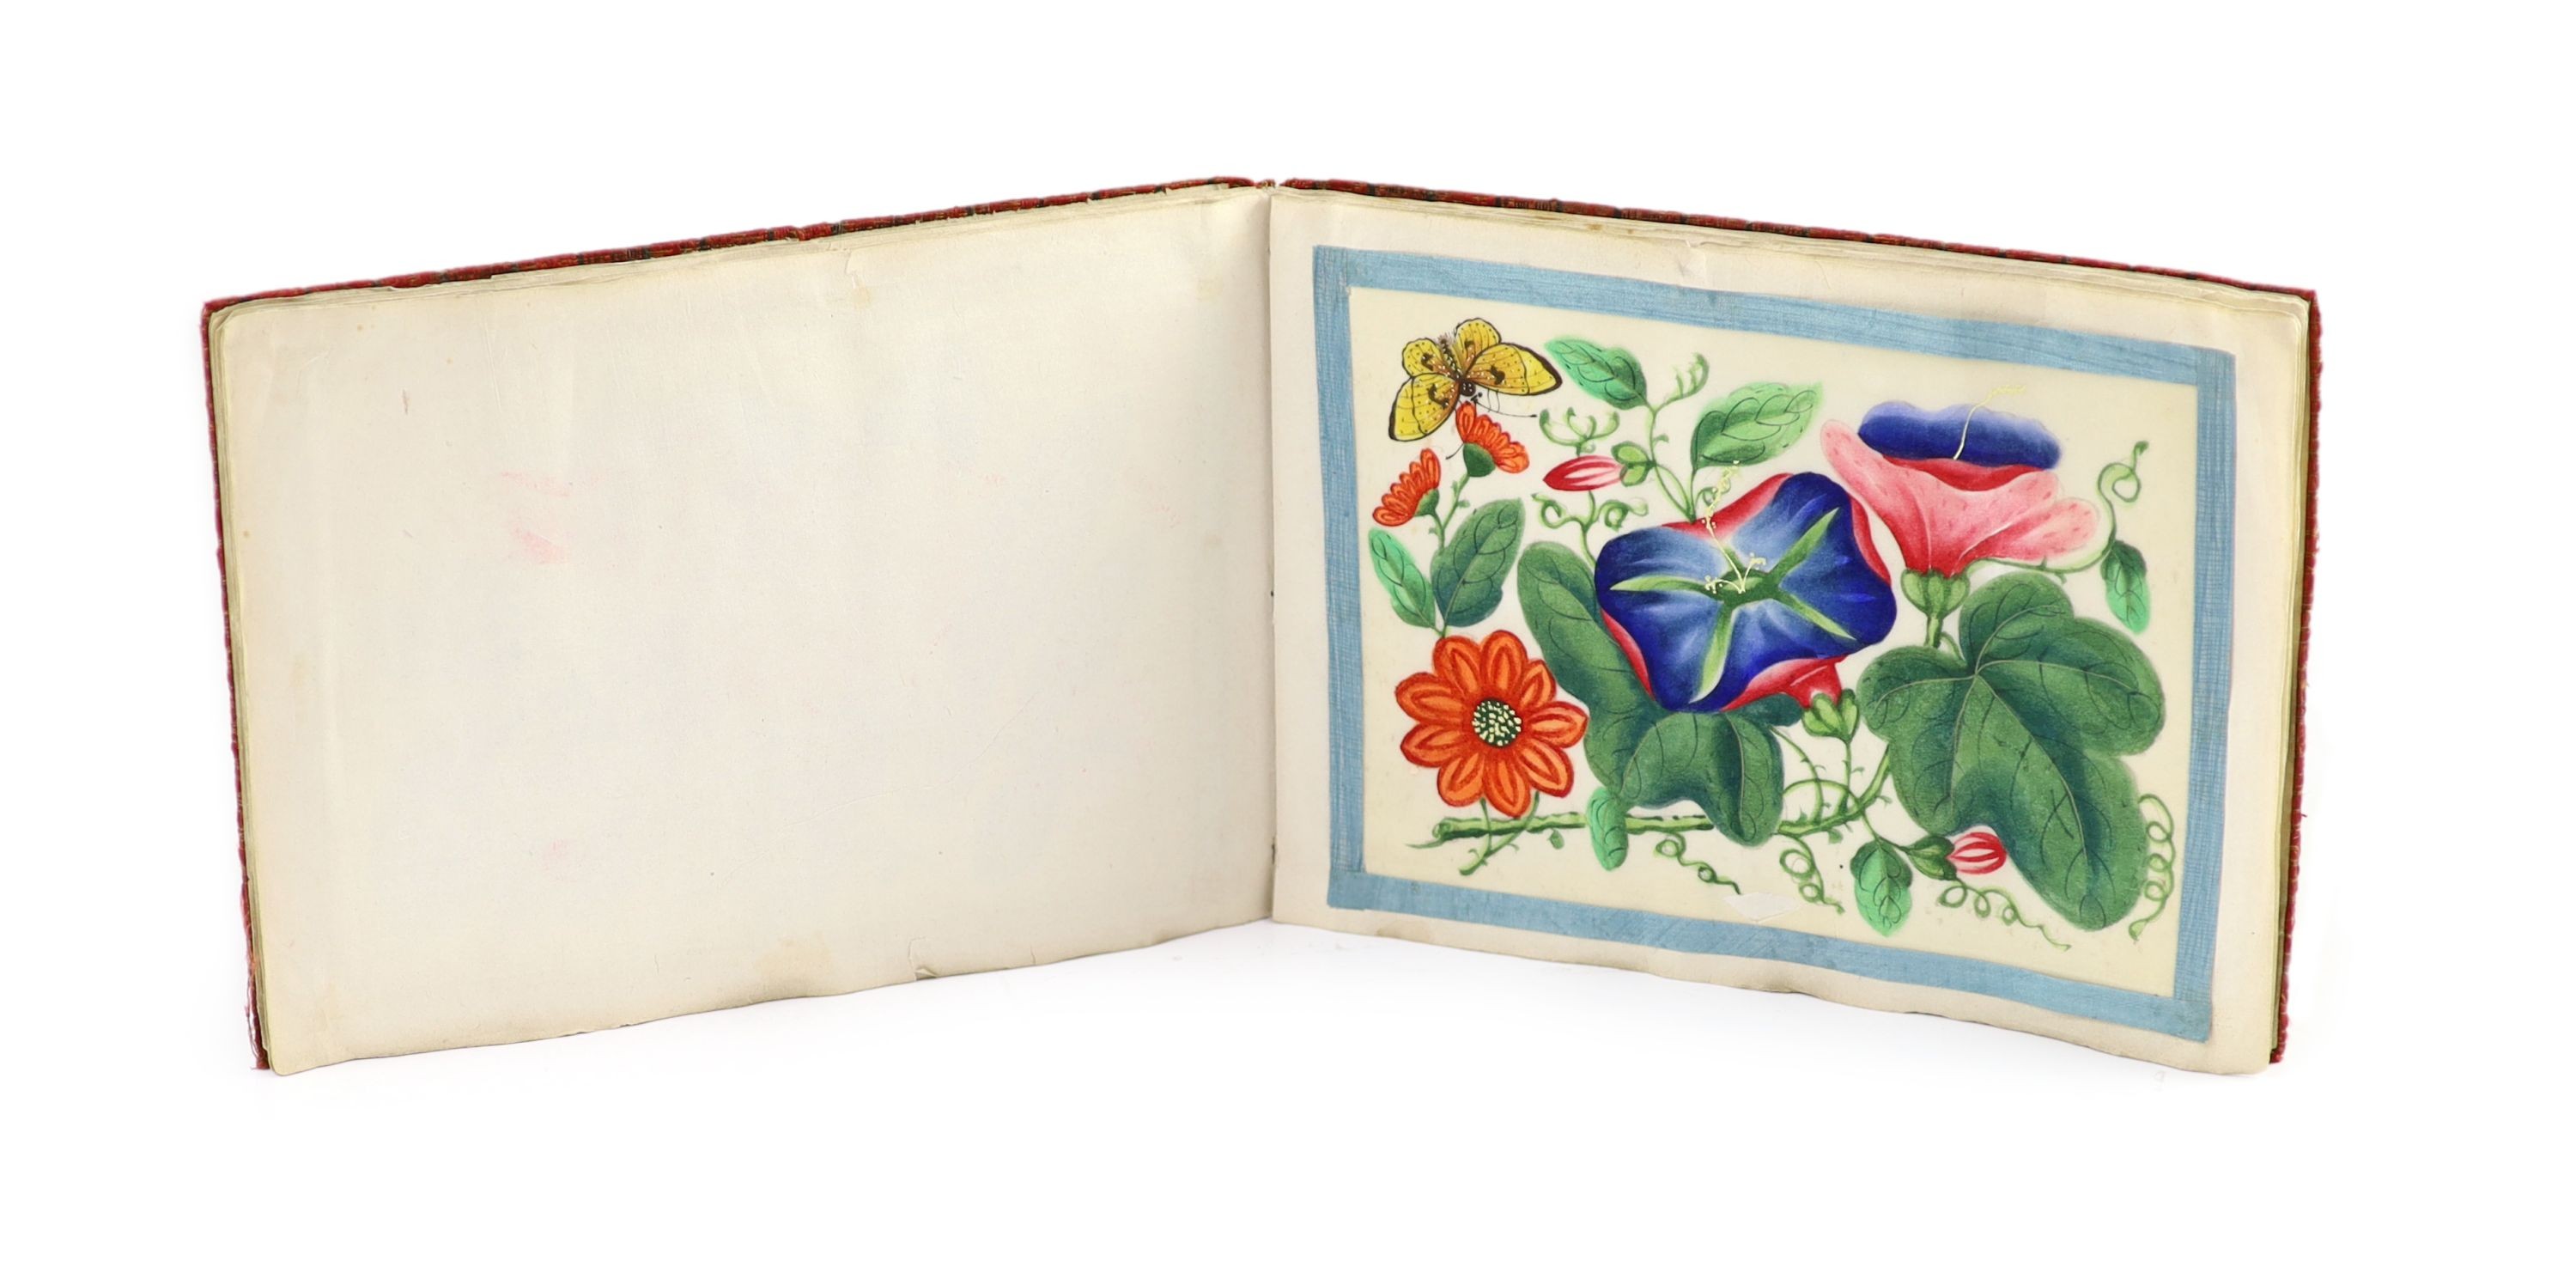 A Chinese album of twelve pith paintings of flowers and butterflies, 19th century, 17 x 24 cm